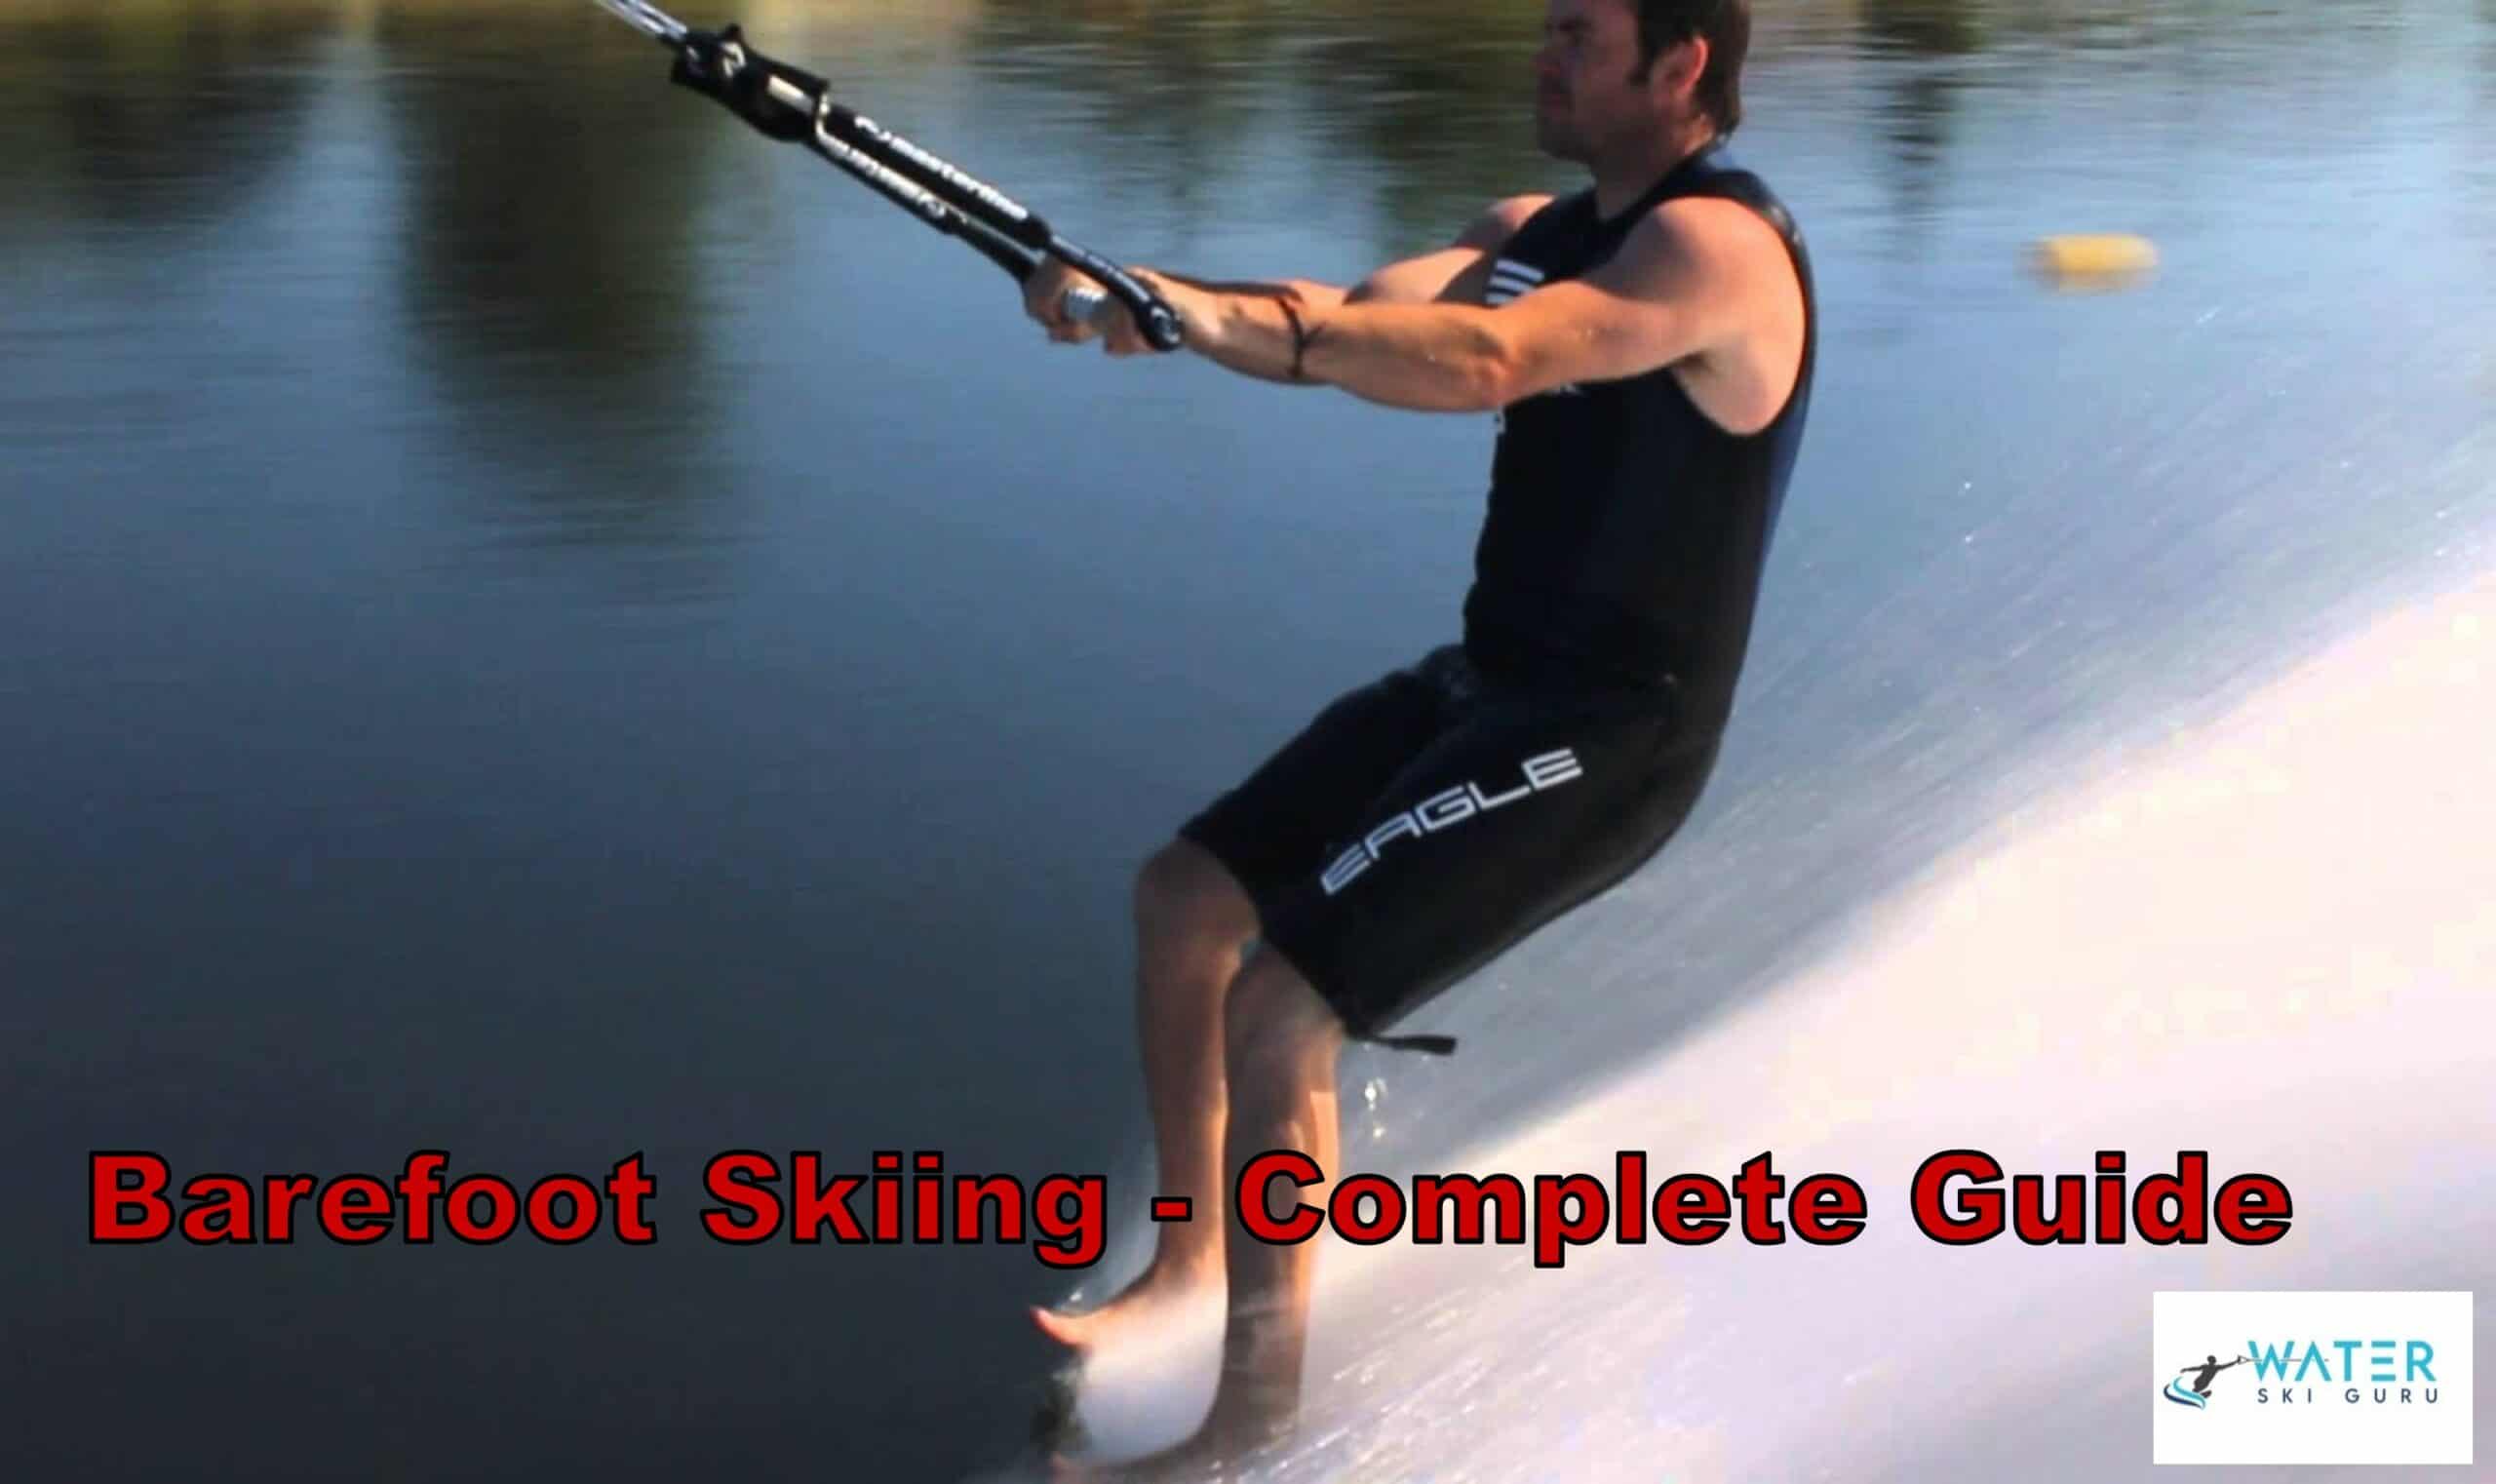 Barefoot Skiing - Complete Guide